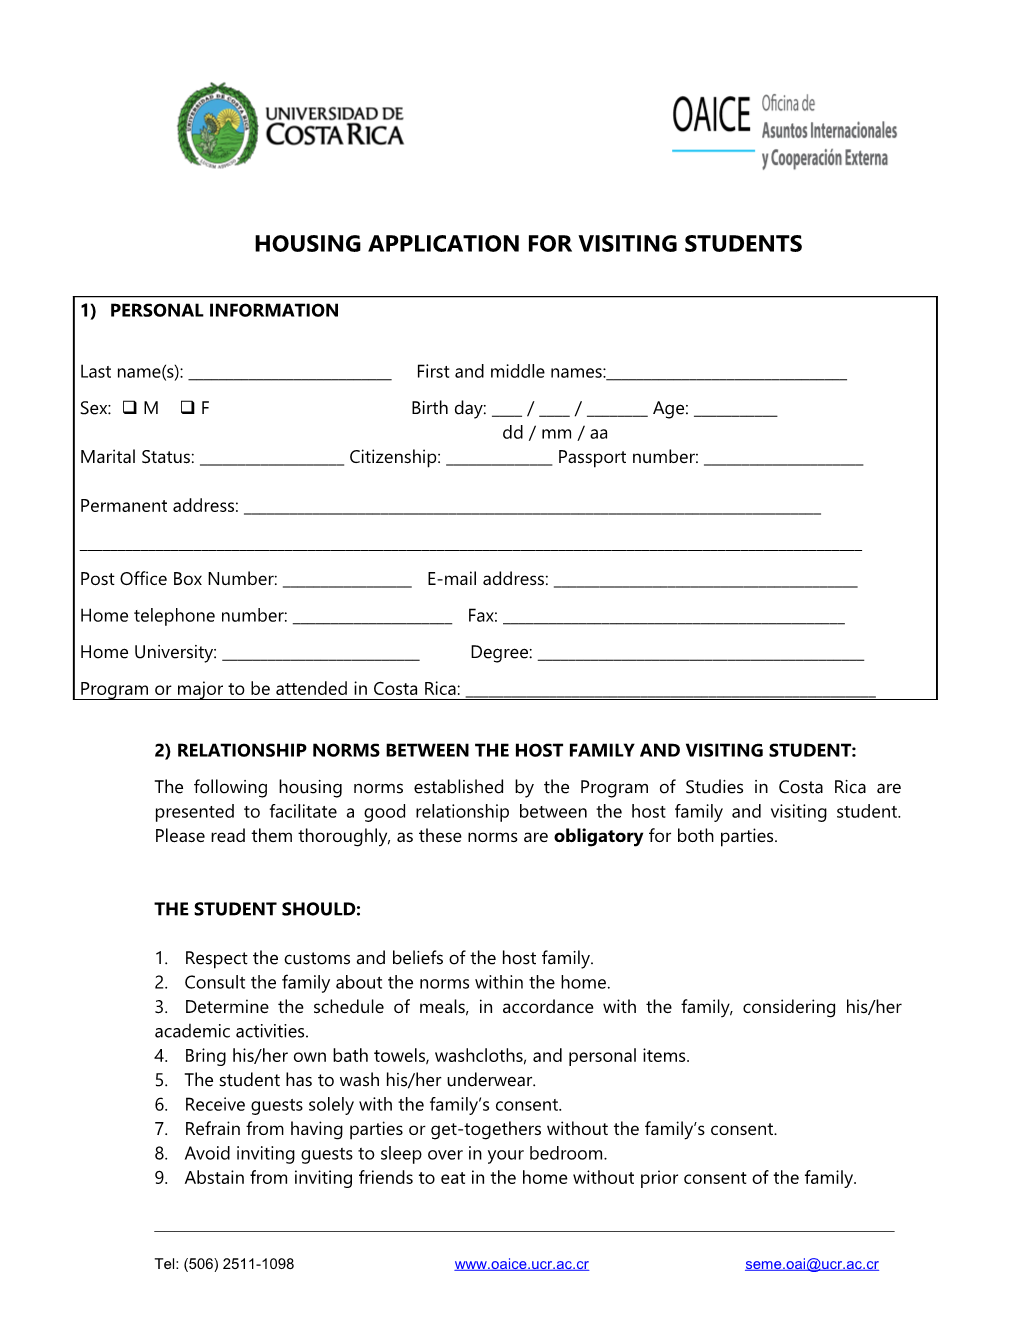 Housing Application for Visiting Students